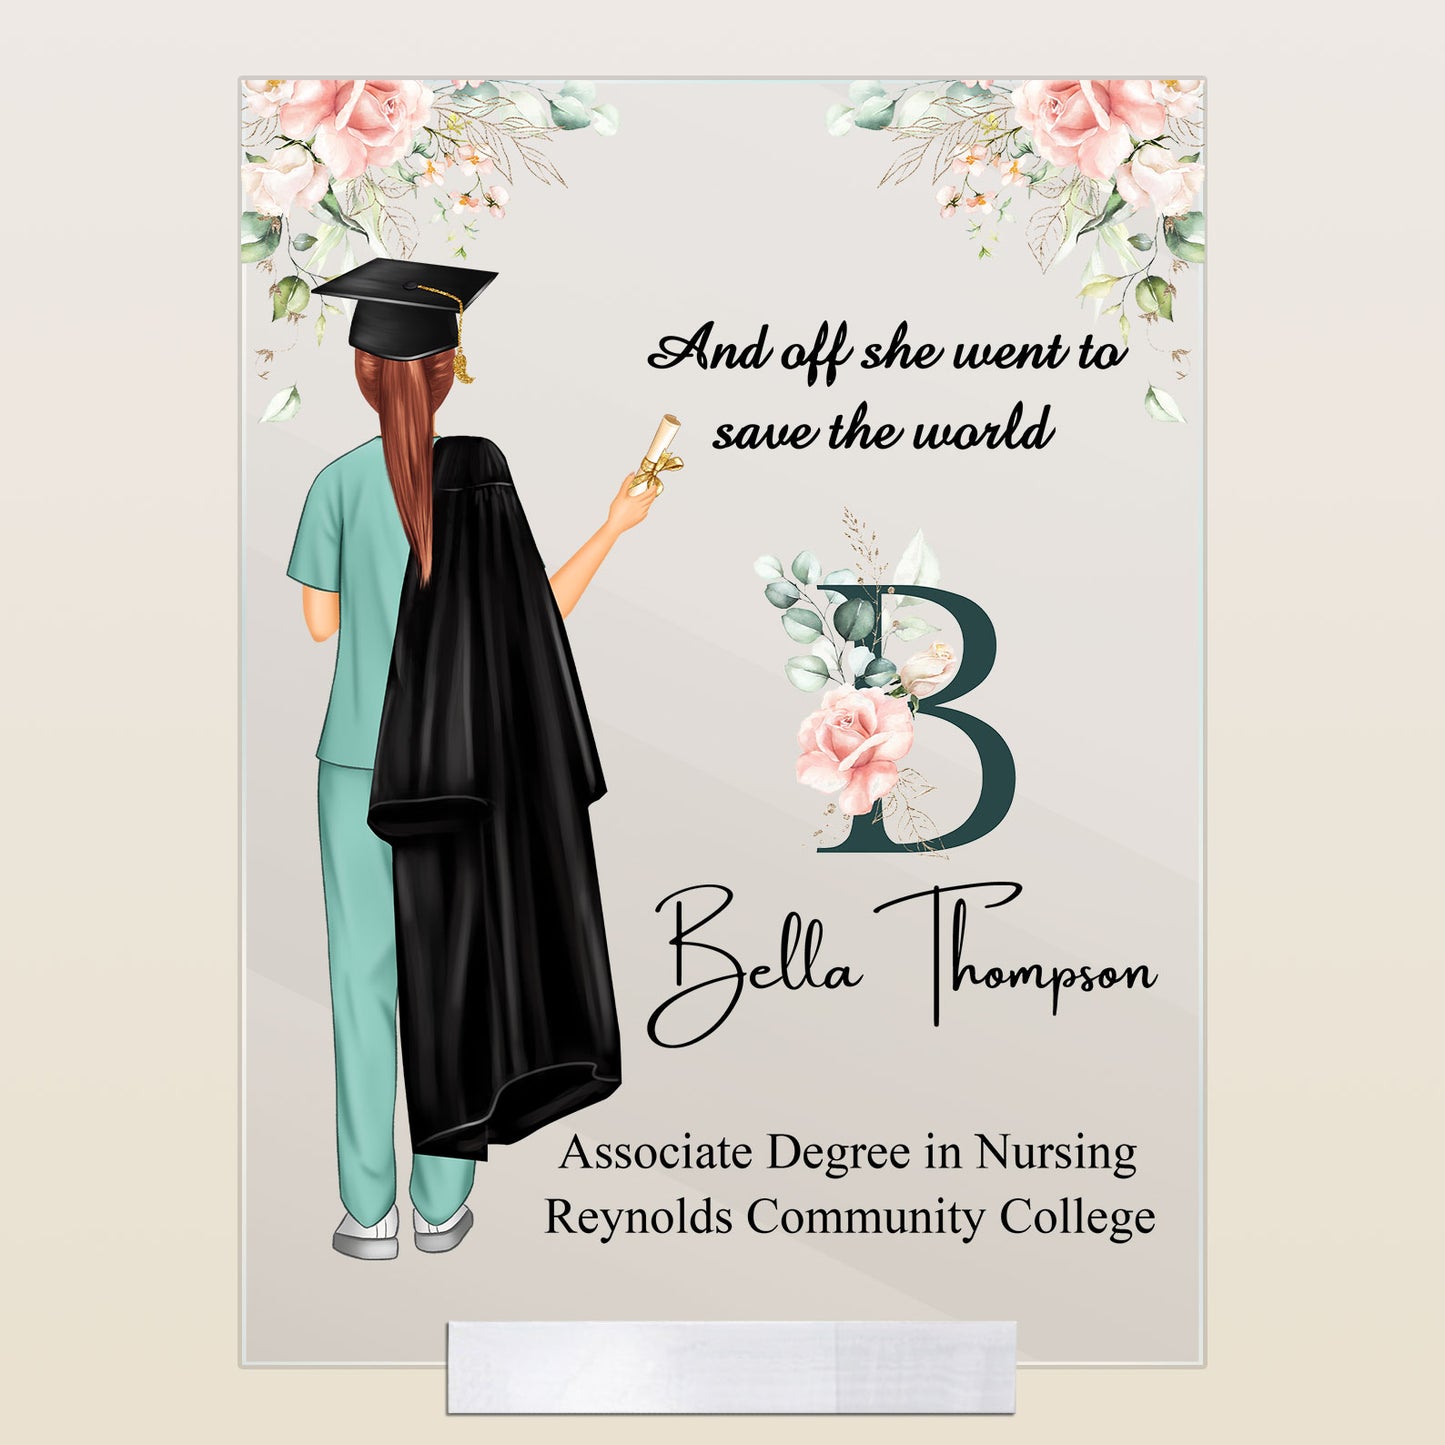 She Went To Save The World - Personalized Acrylic Plaque - Birthday, Graduation, Year End, Congratulation Gift For Graduate Nurses, Friends, Daughters, Granddaughters